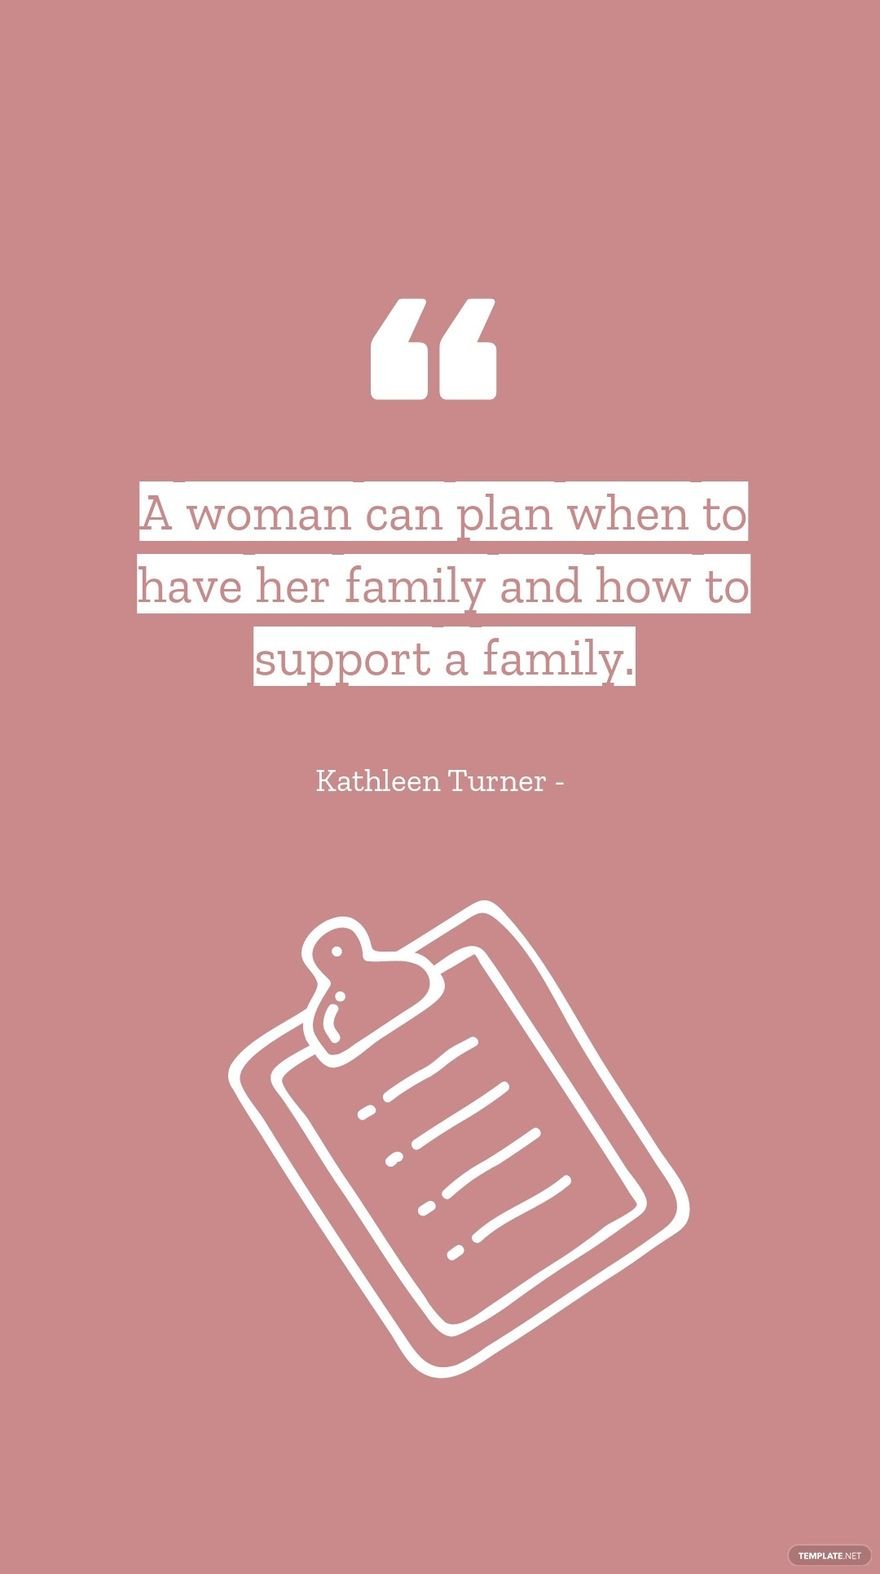 Free Kathleen Turner - A woman can plan when to have her family and how to support a family.